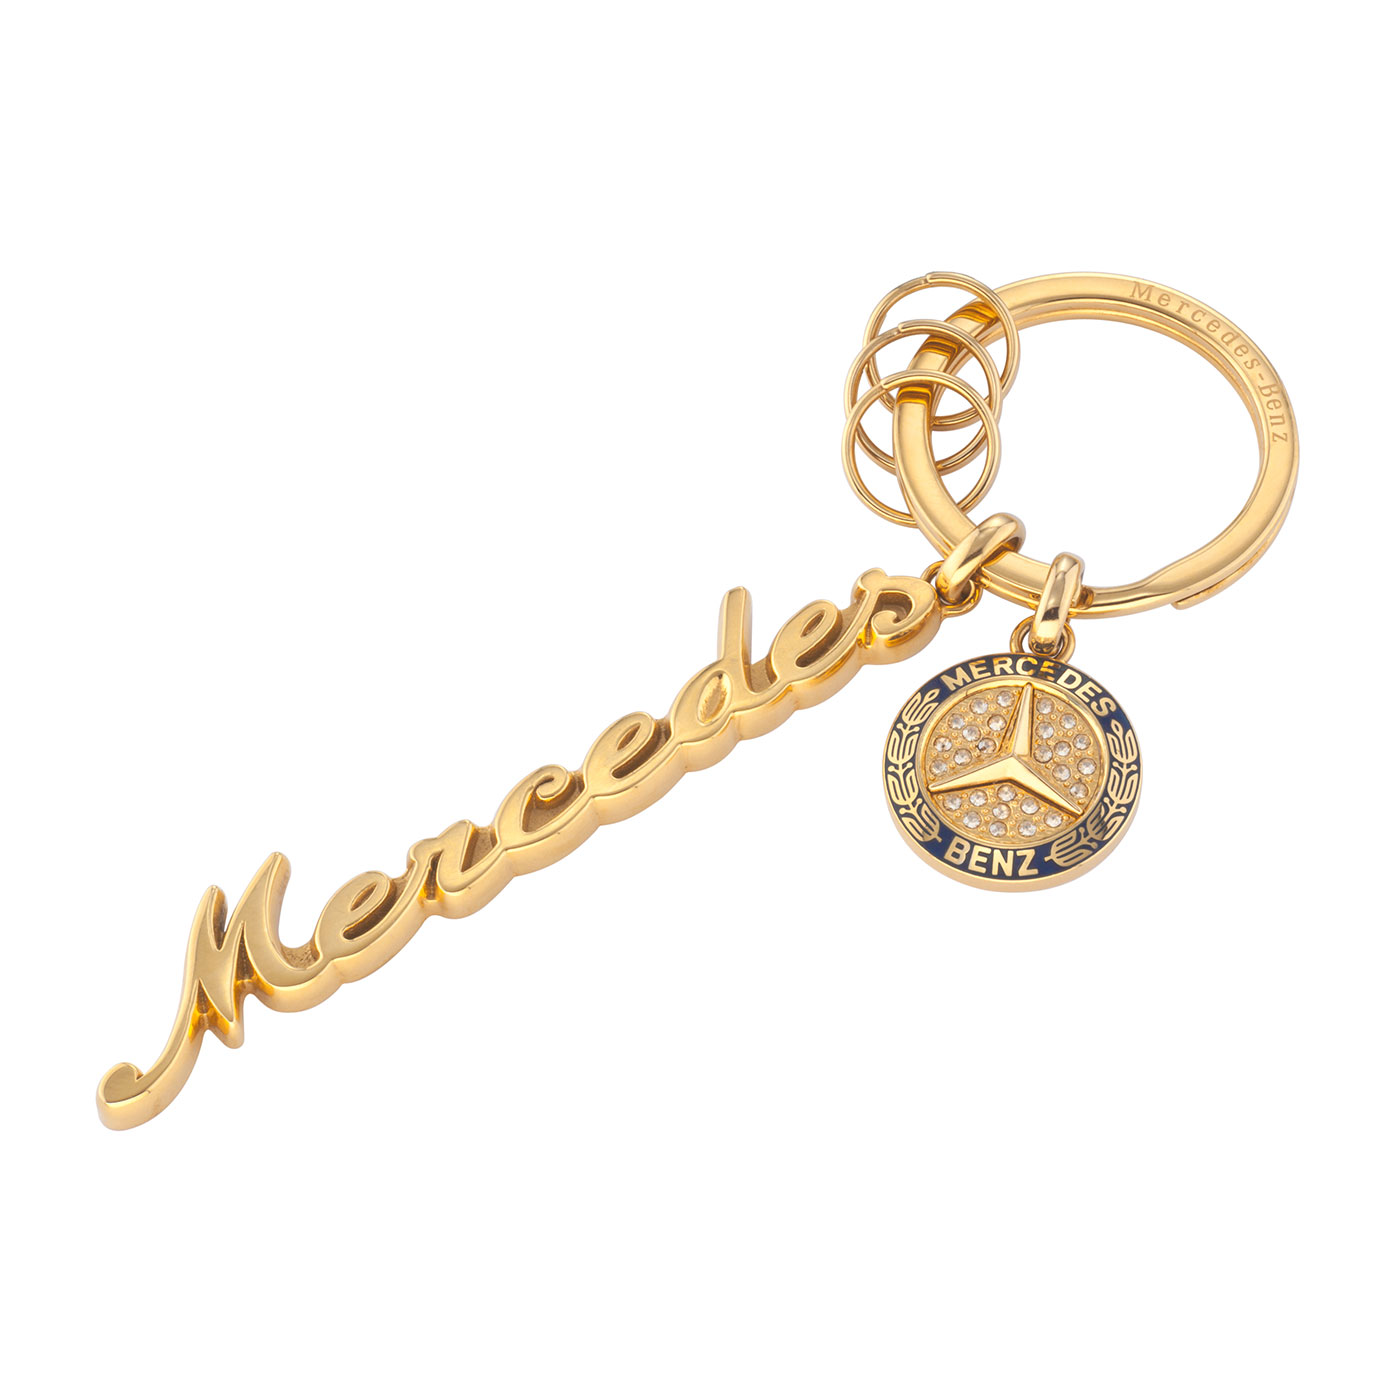 Model Series E-Class Key ring  Mercedes-Benz Lifestyle Collection